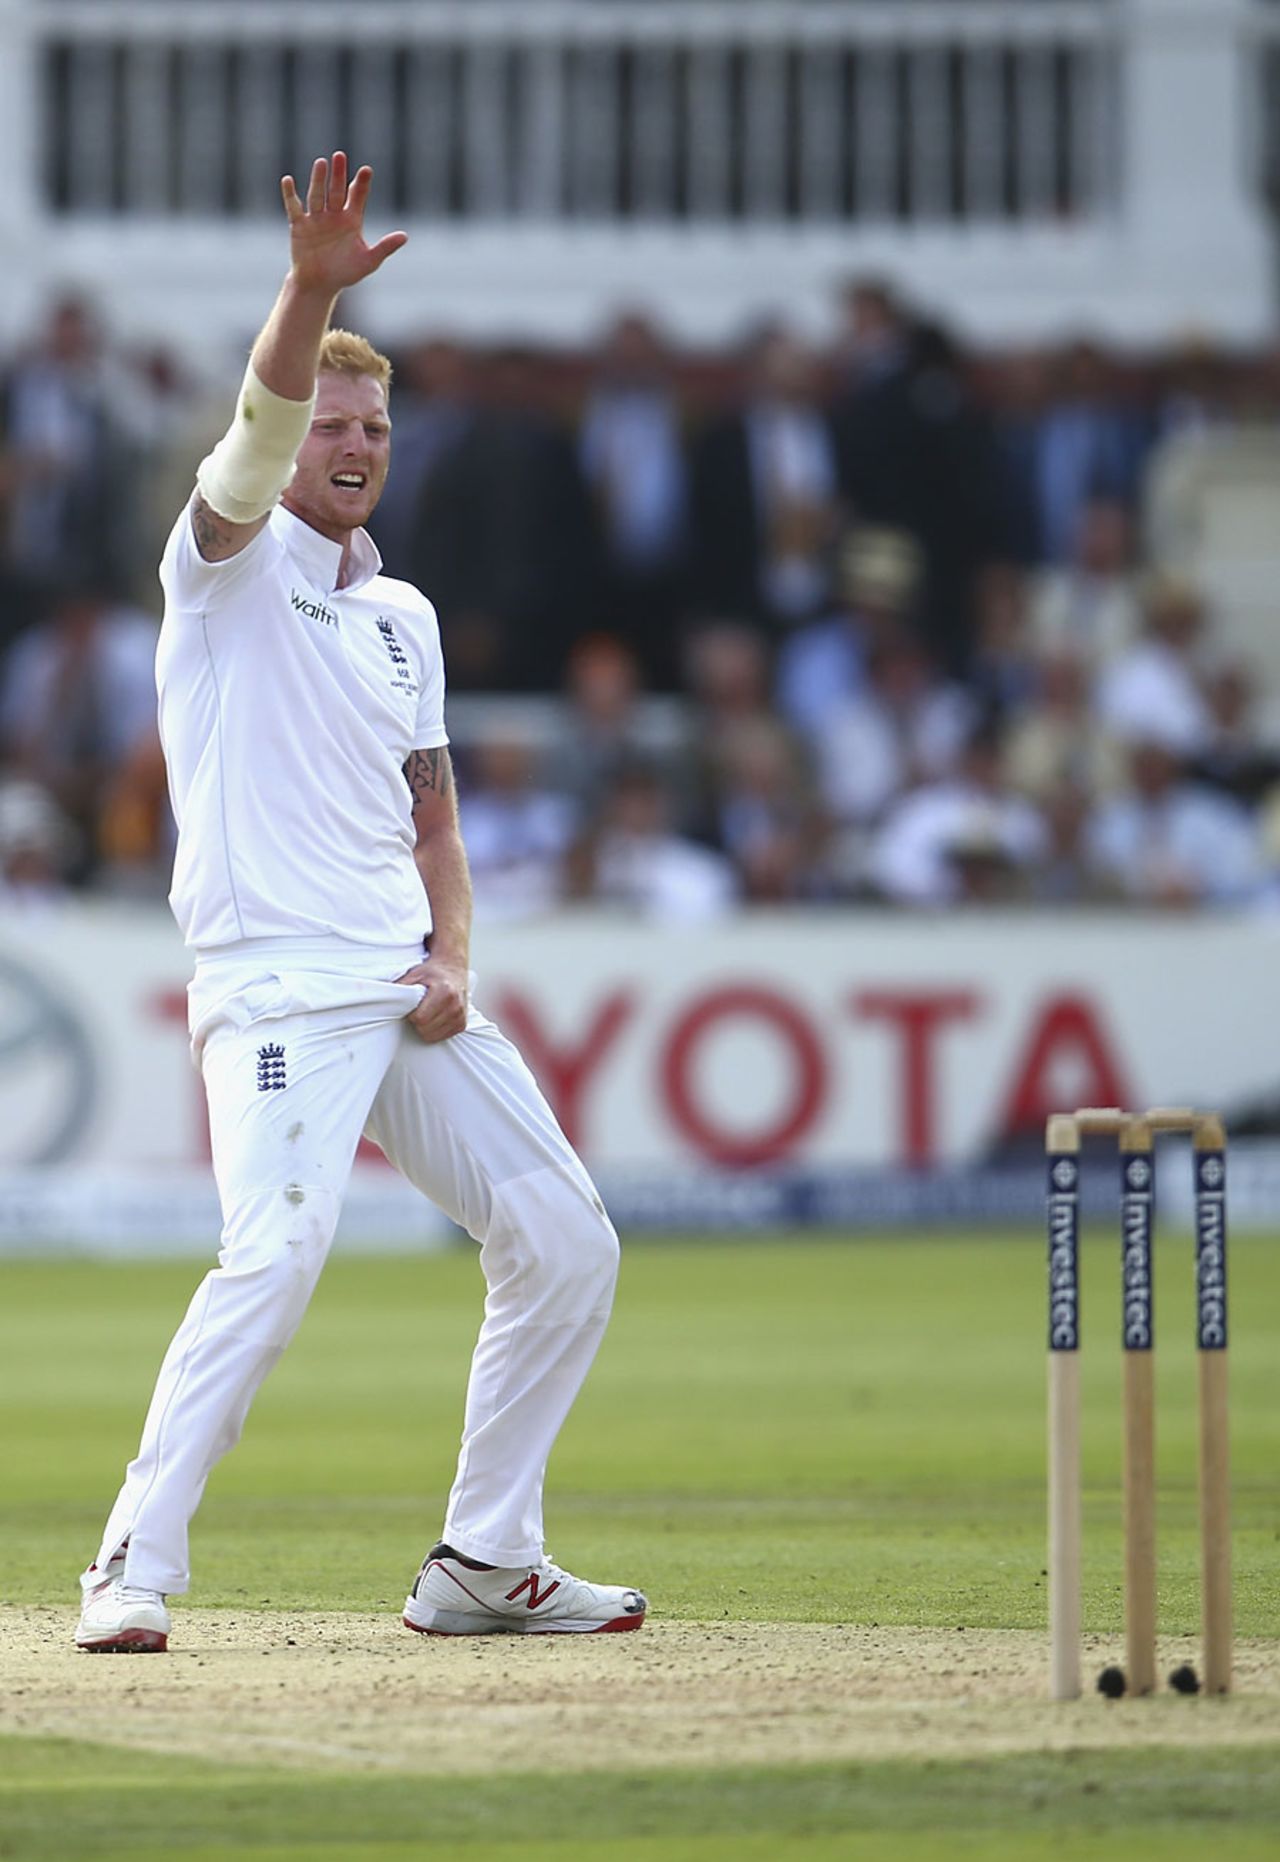 Ben Stokes gets to grip with an appeal, England v Australia, 2nd Investec Ashes Test, Lord's, 1st day, July 16, 2015